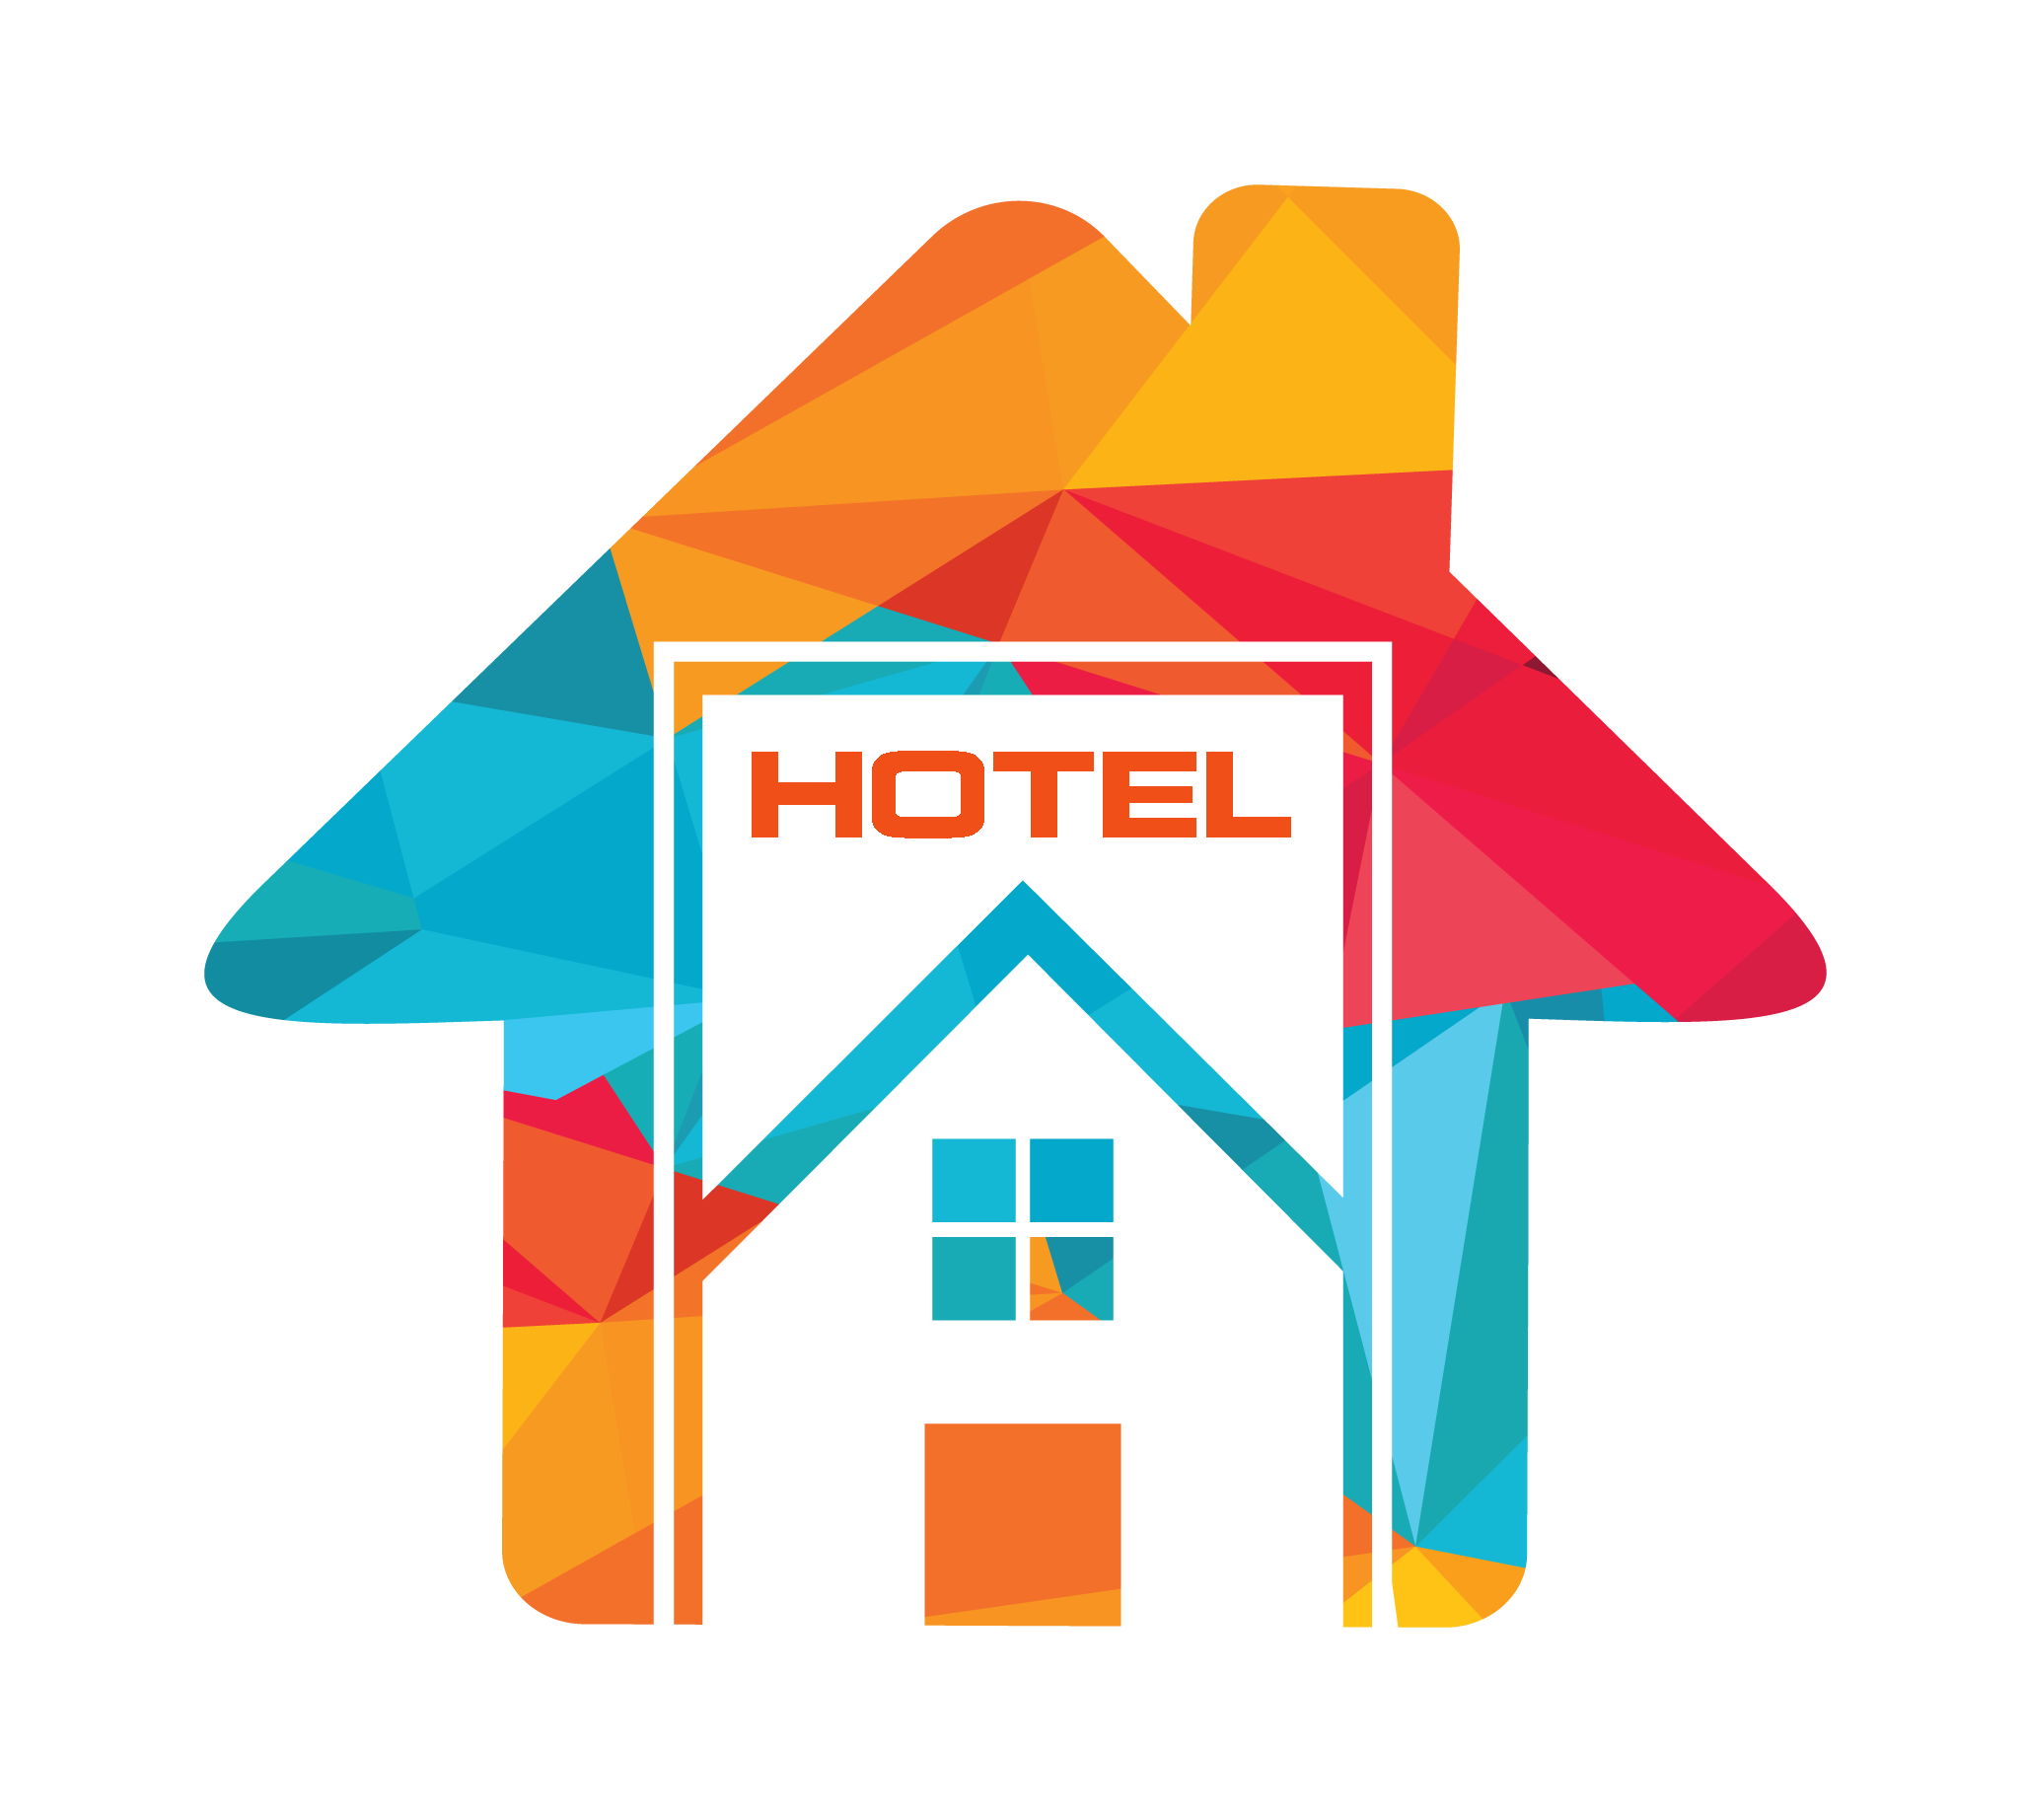 Hotel Booking